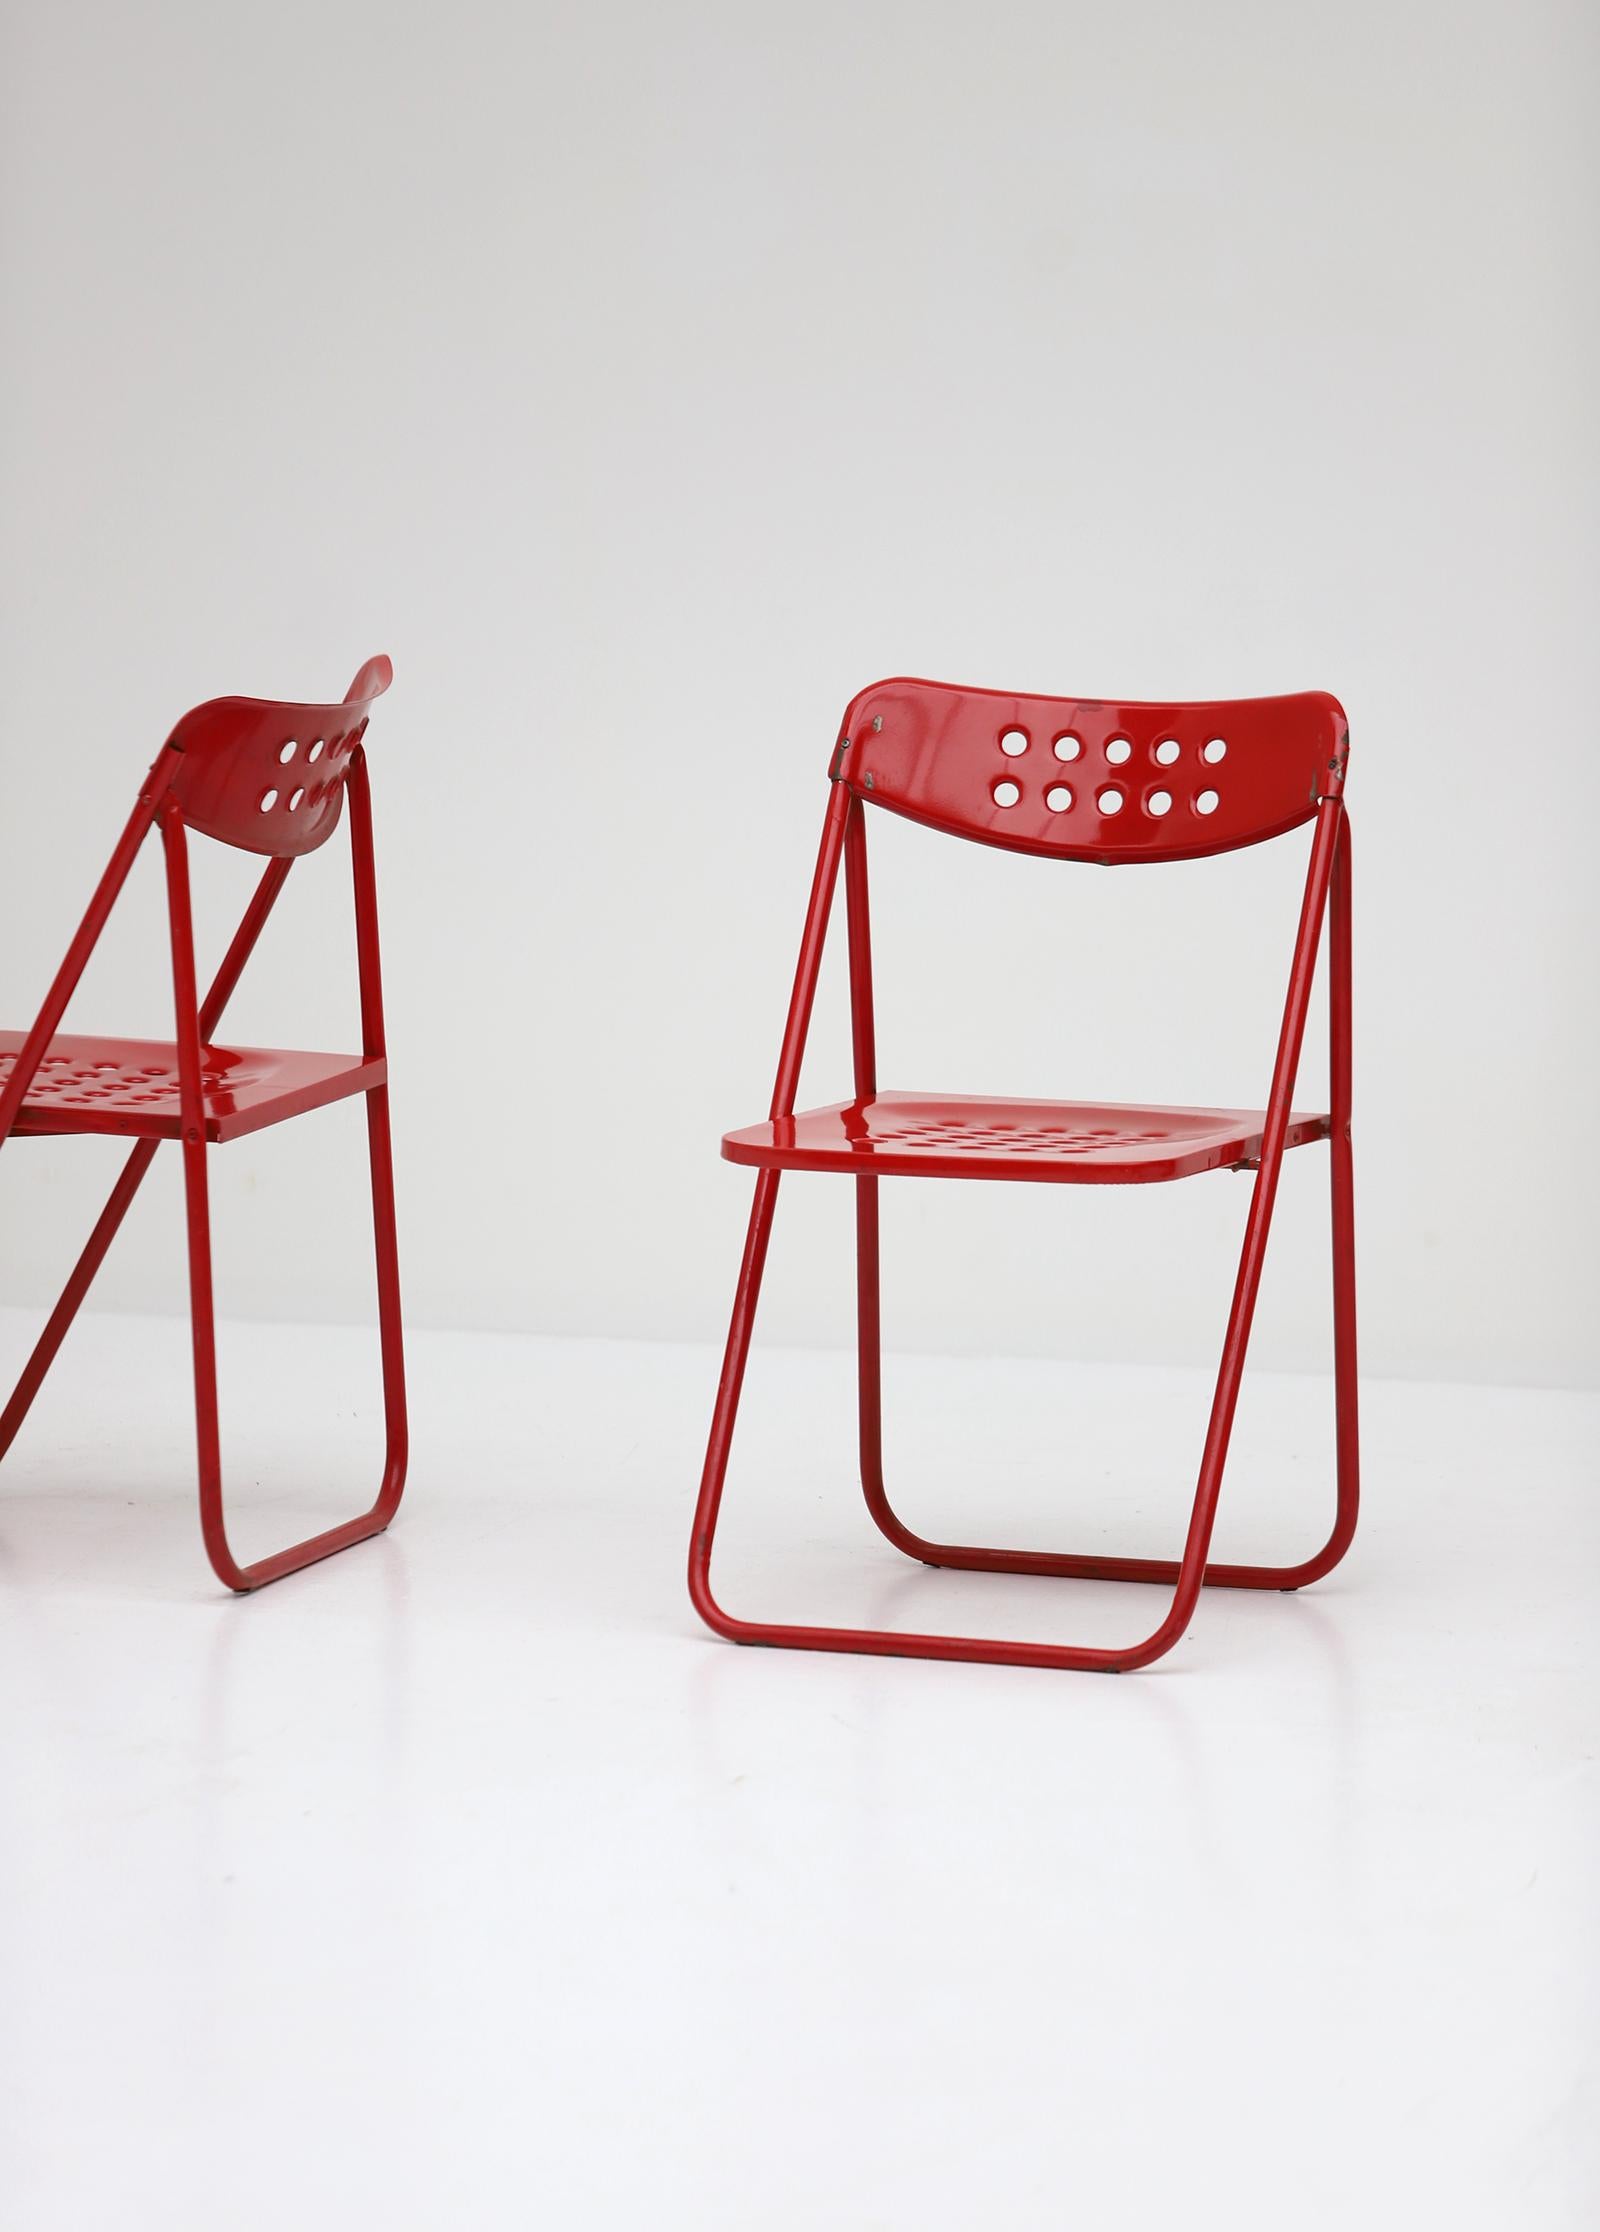 European Set of Four Modern Red Lacquered Metal Folding Chairs 1980s For Sale